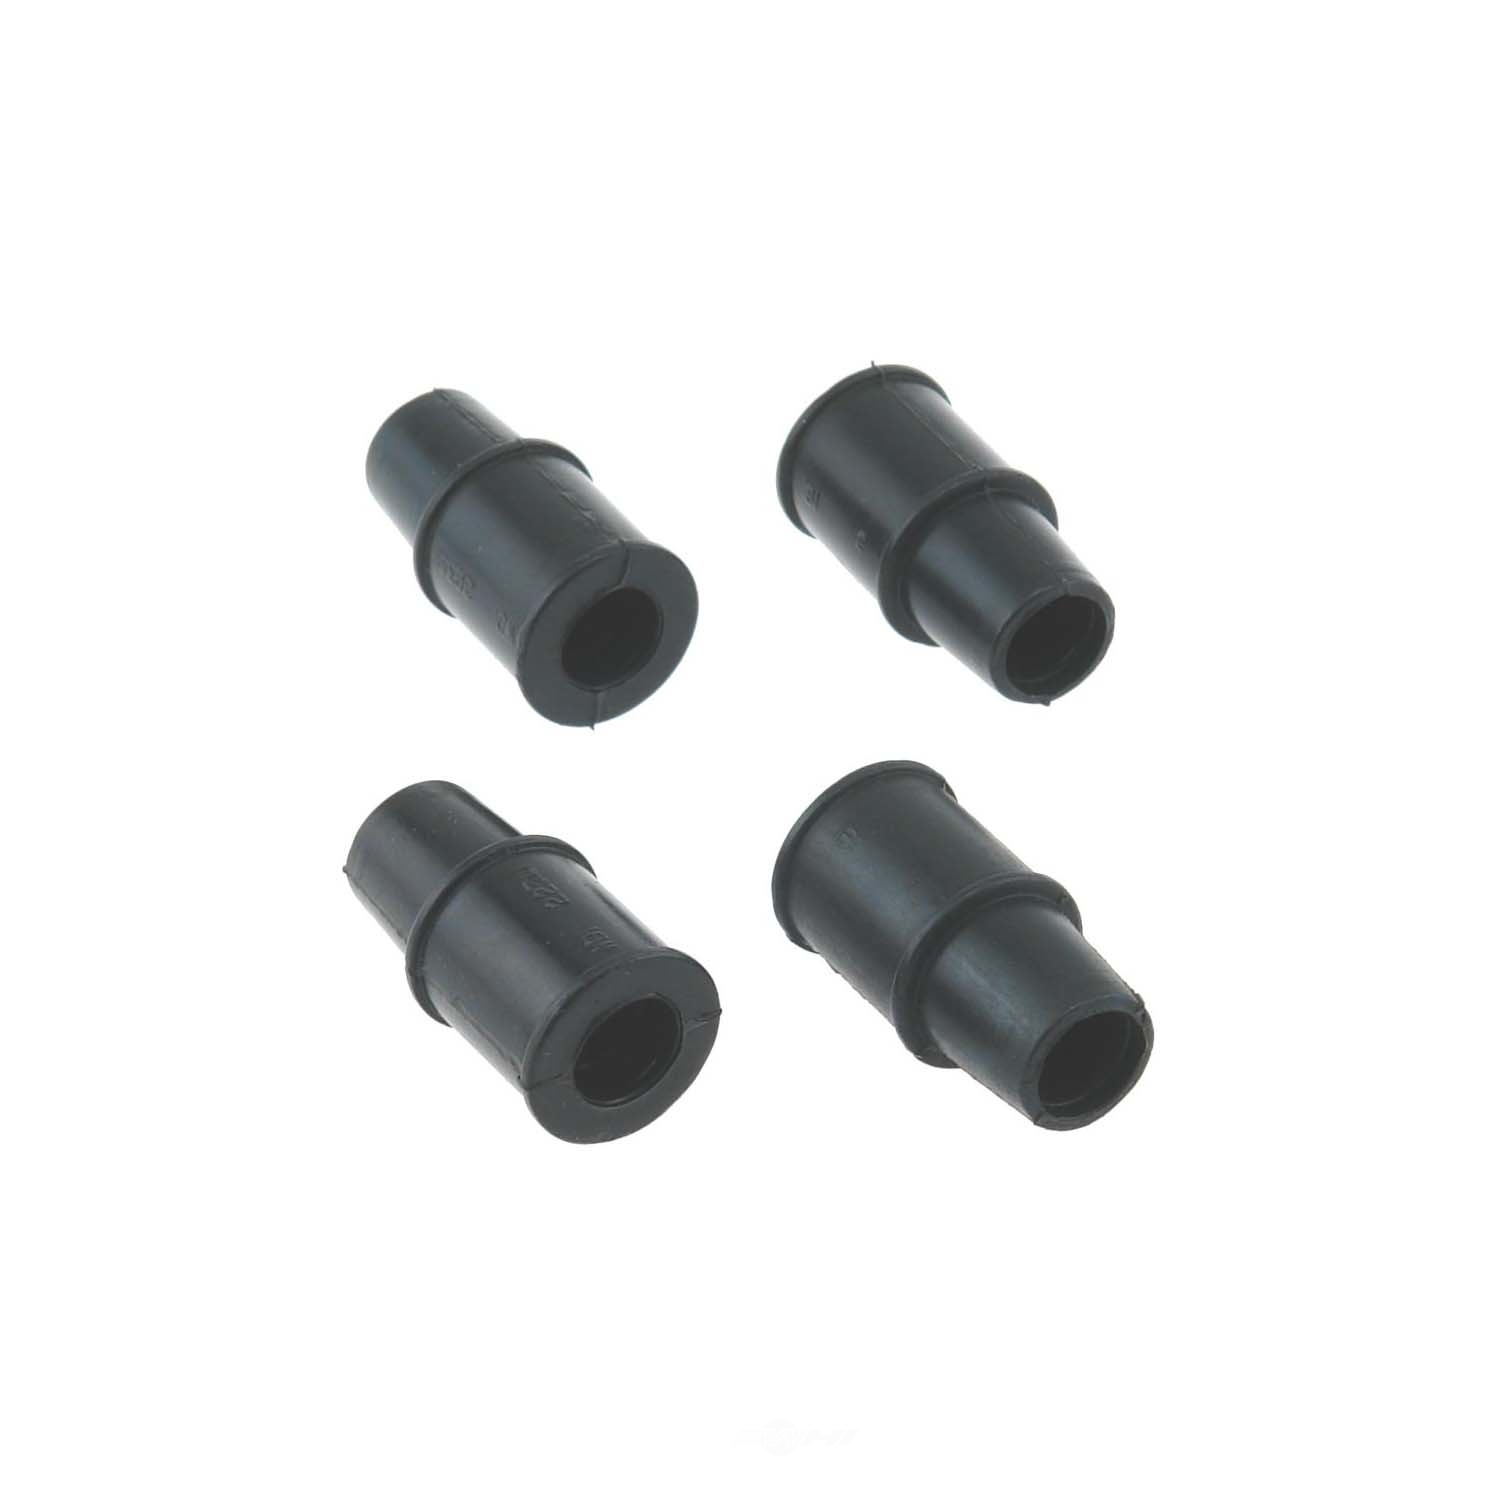 CARLSON QUALITY BRAKE PARTS - Kit Contains Pin Bushings Only (Front) - CRL H5568